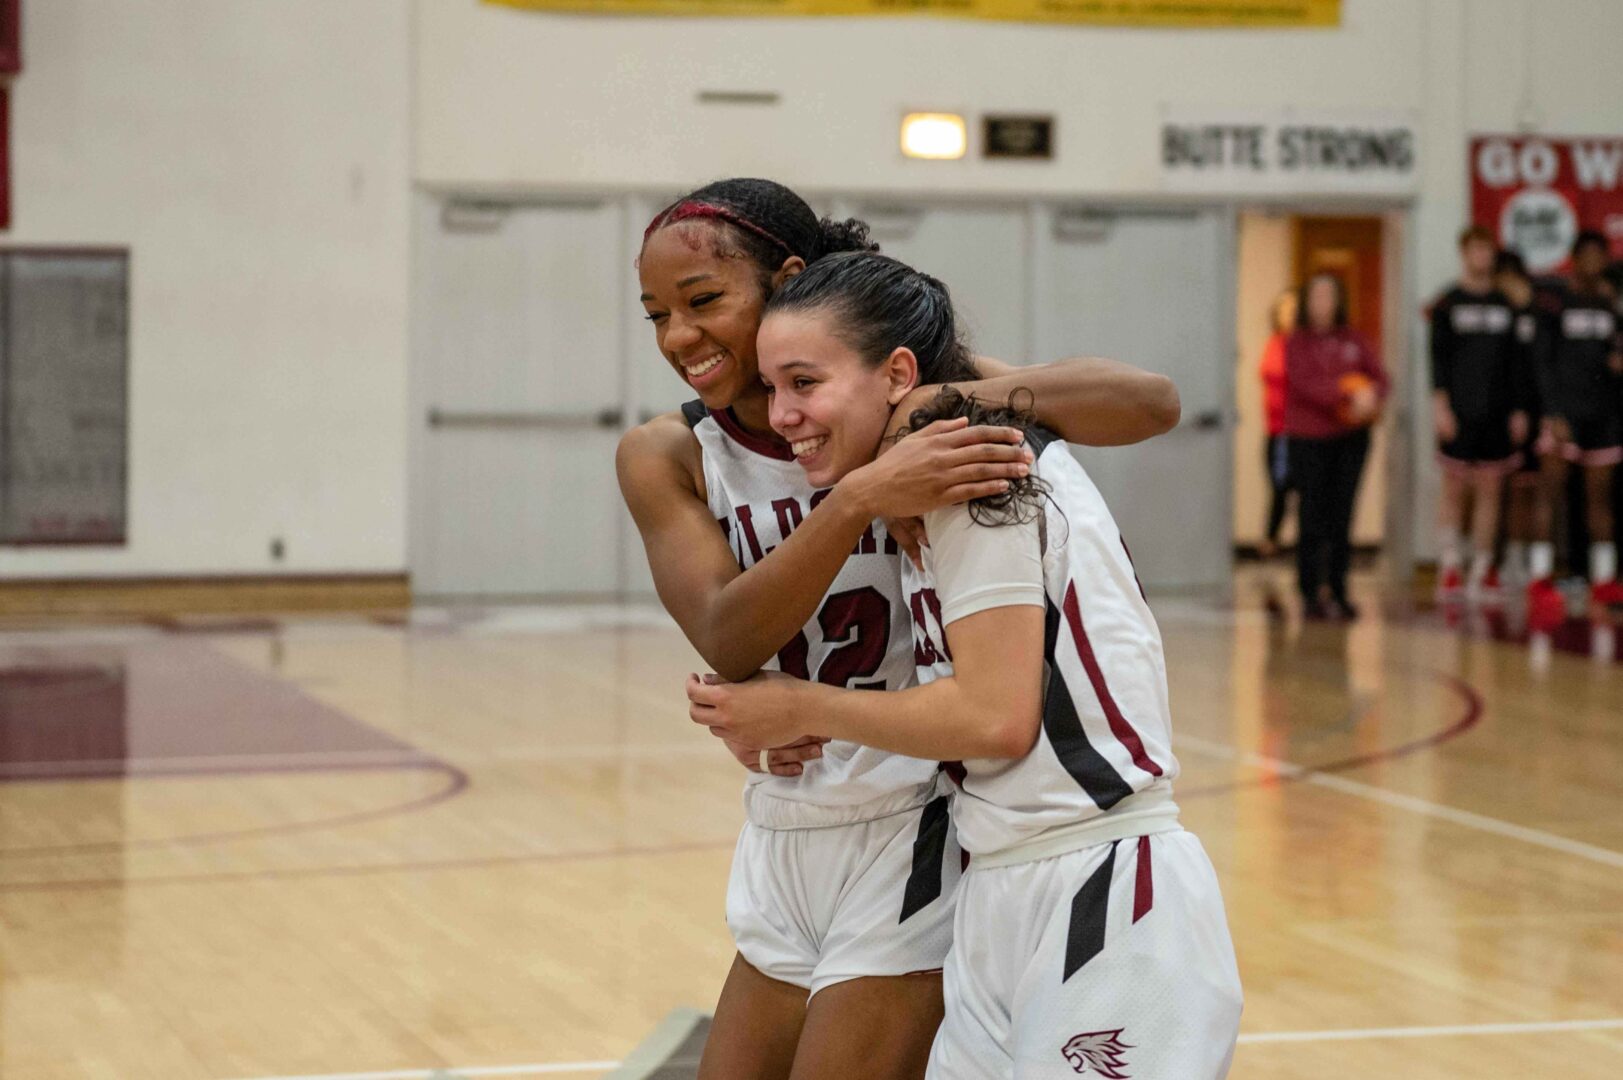 Wildcats Zhane Duckett (left) and Brandy Huffhines embrace after winning their basketball game.